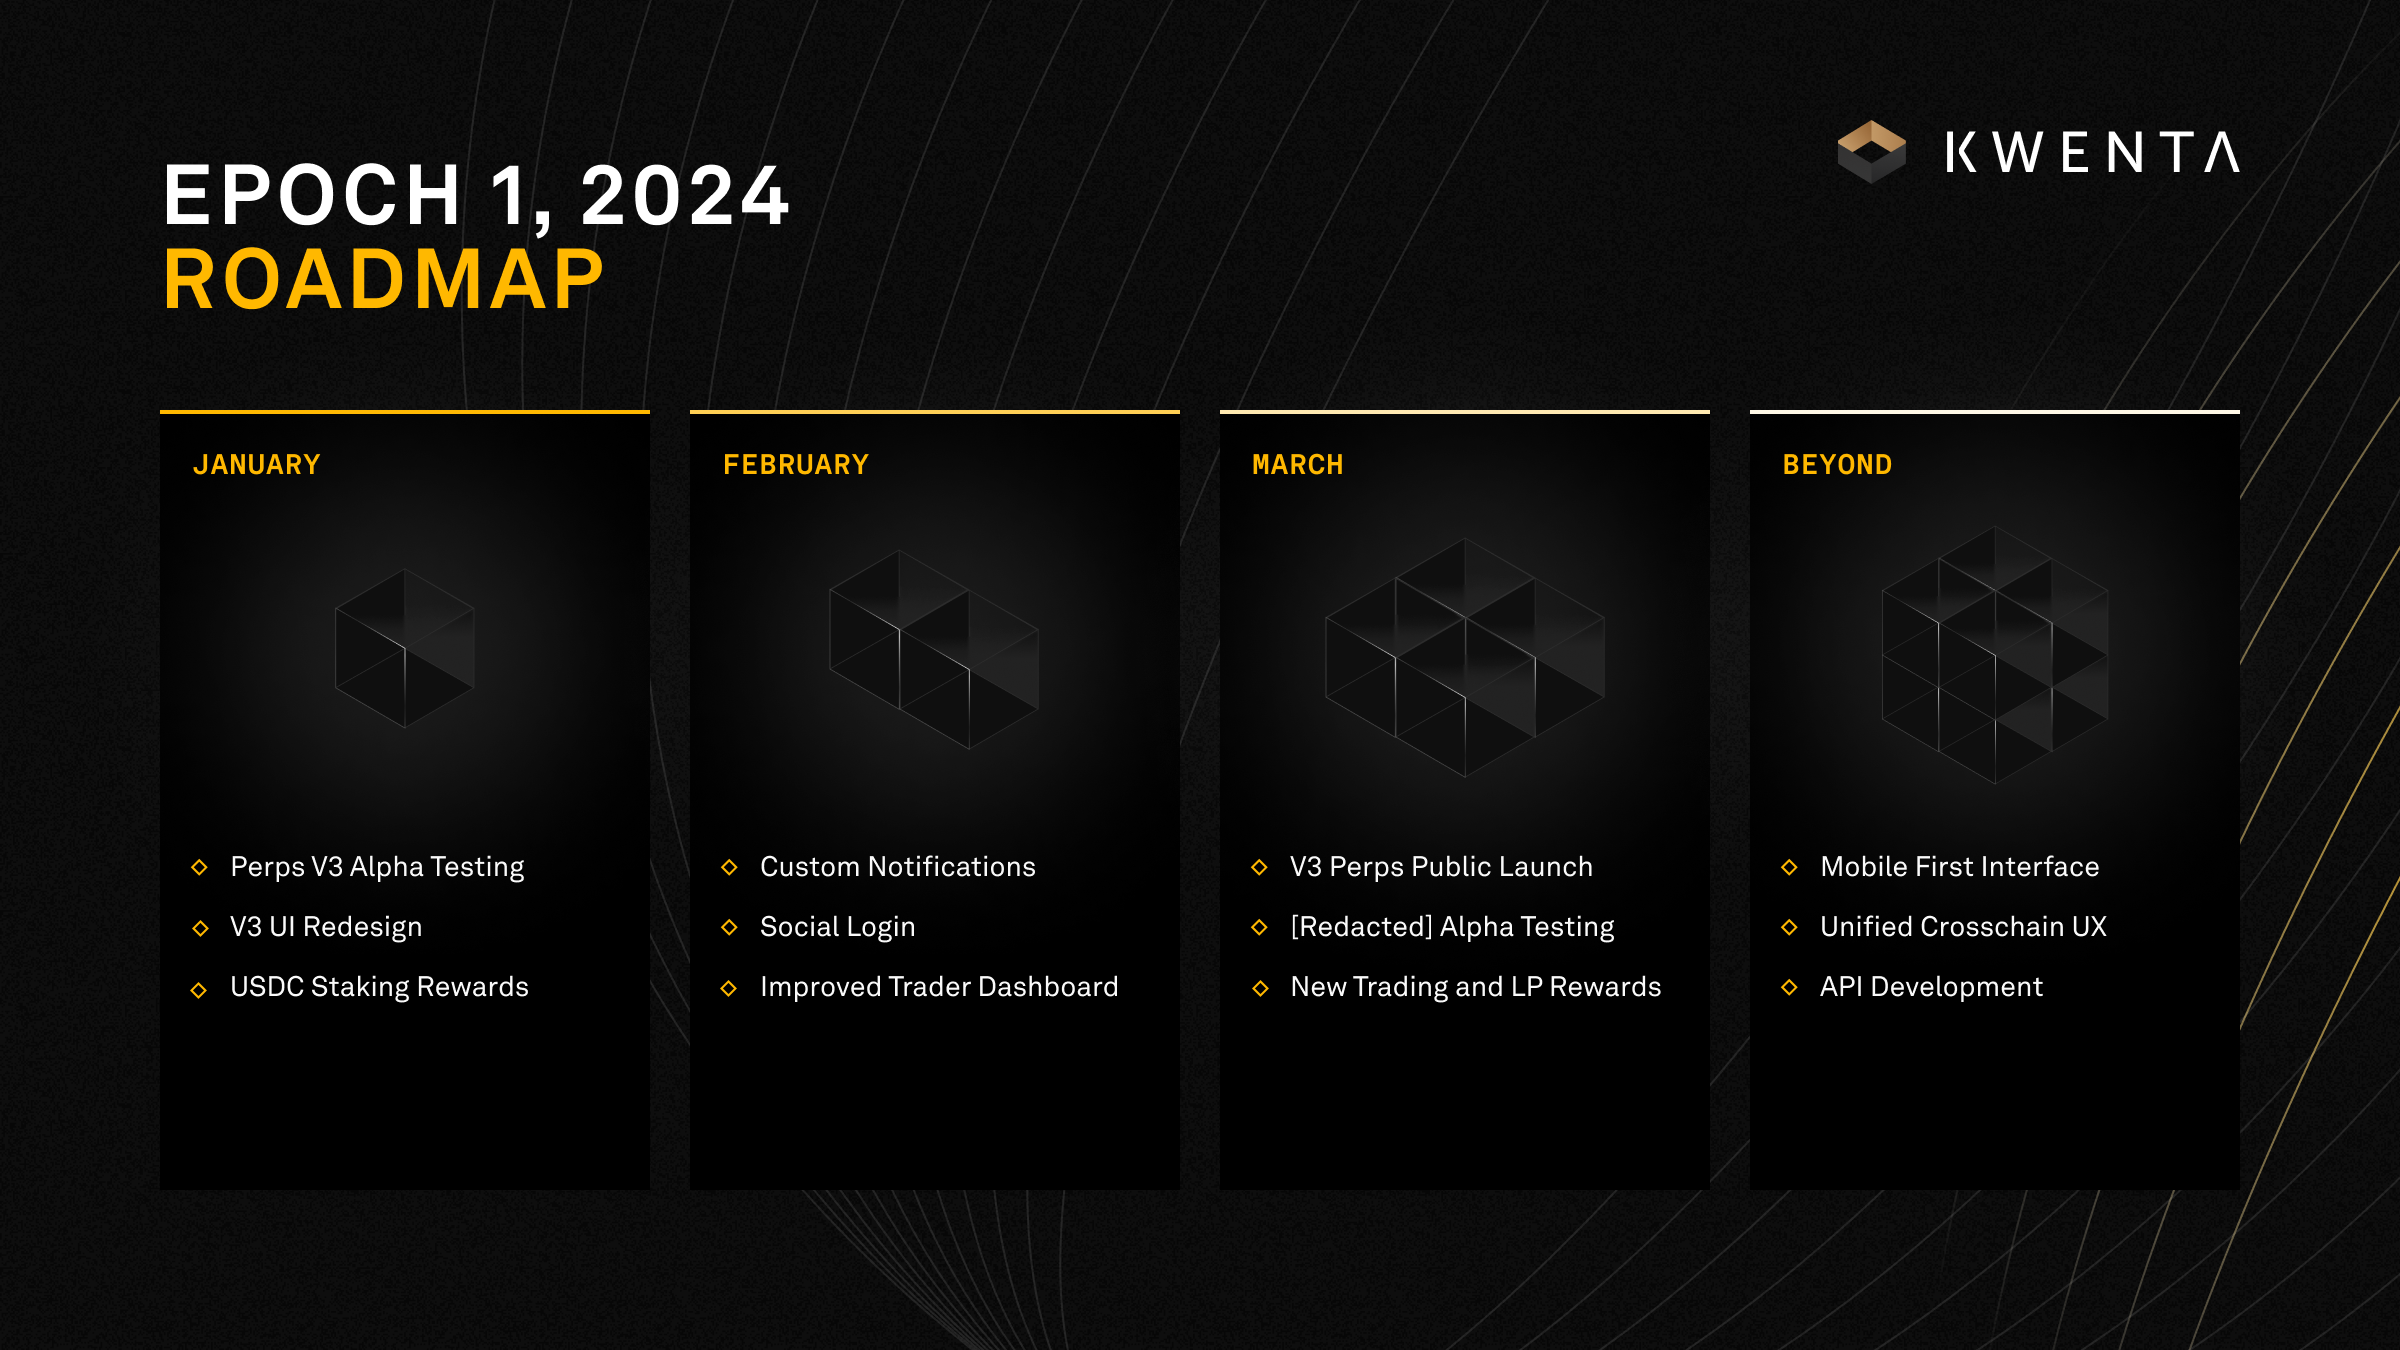 Kwenta's Epoch 1, 2024 Roadmap unveils a vision for the future of trading in Web3